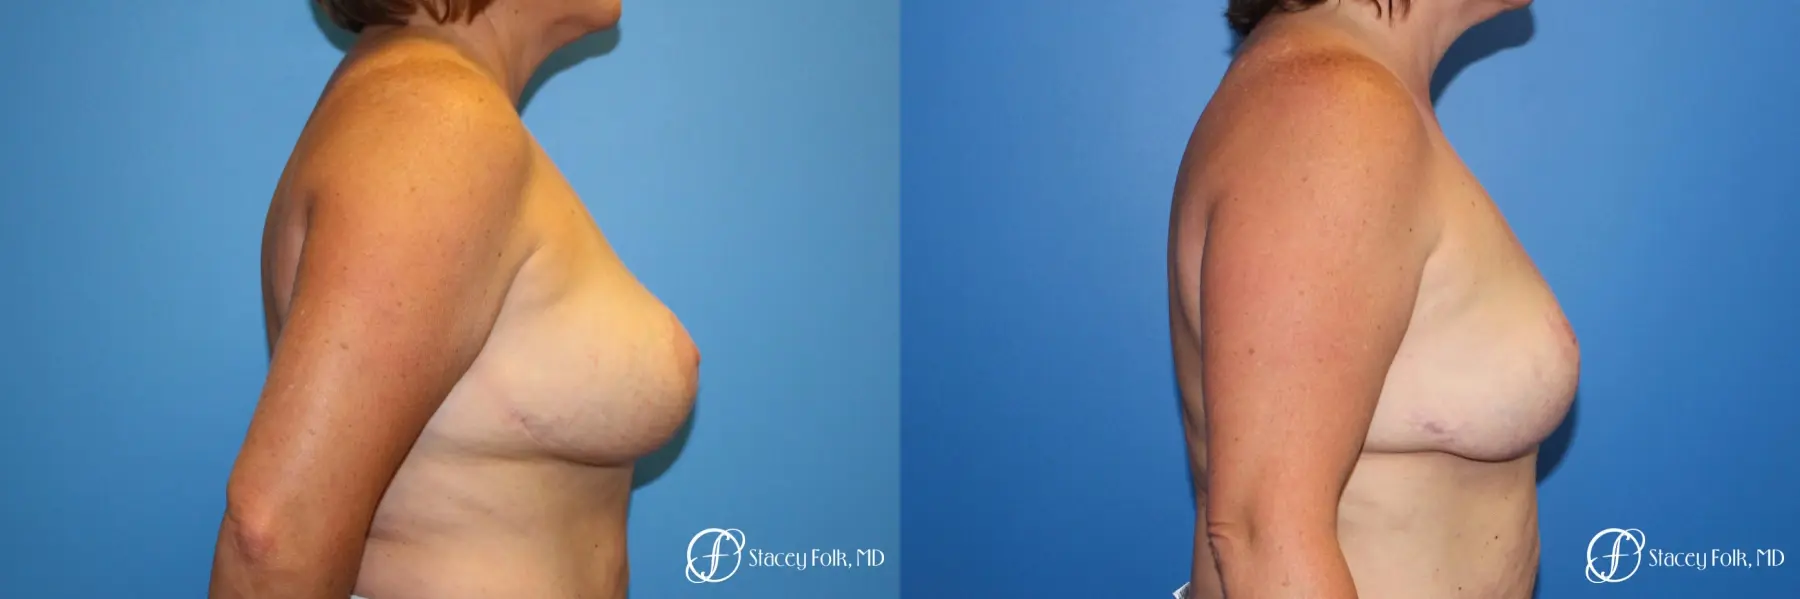 Breast Revision - Removal of Implant, Fat Transfer, Breast Lift (Mastopexy) - Before and After 3